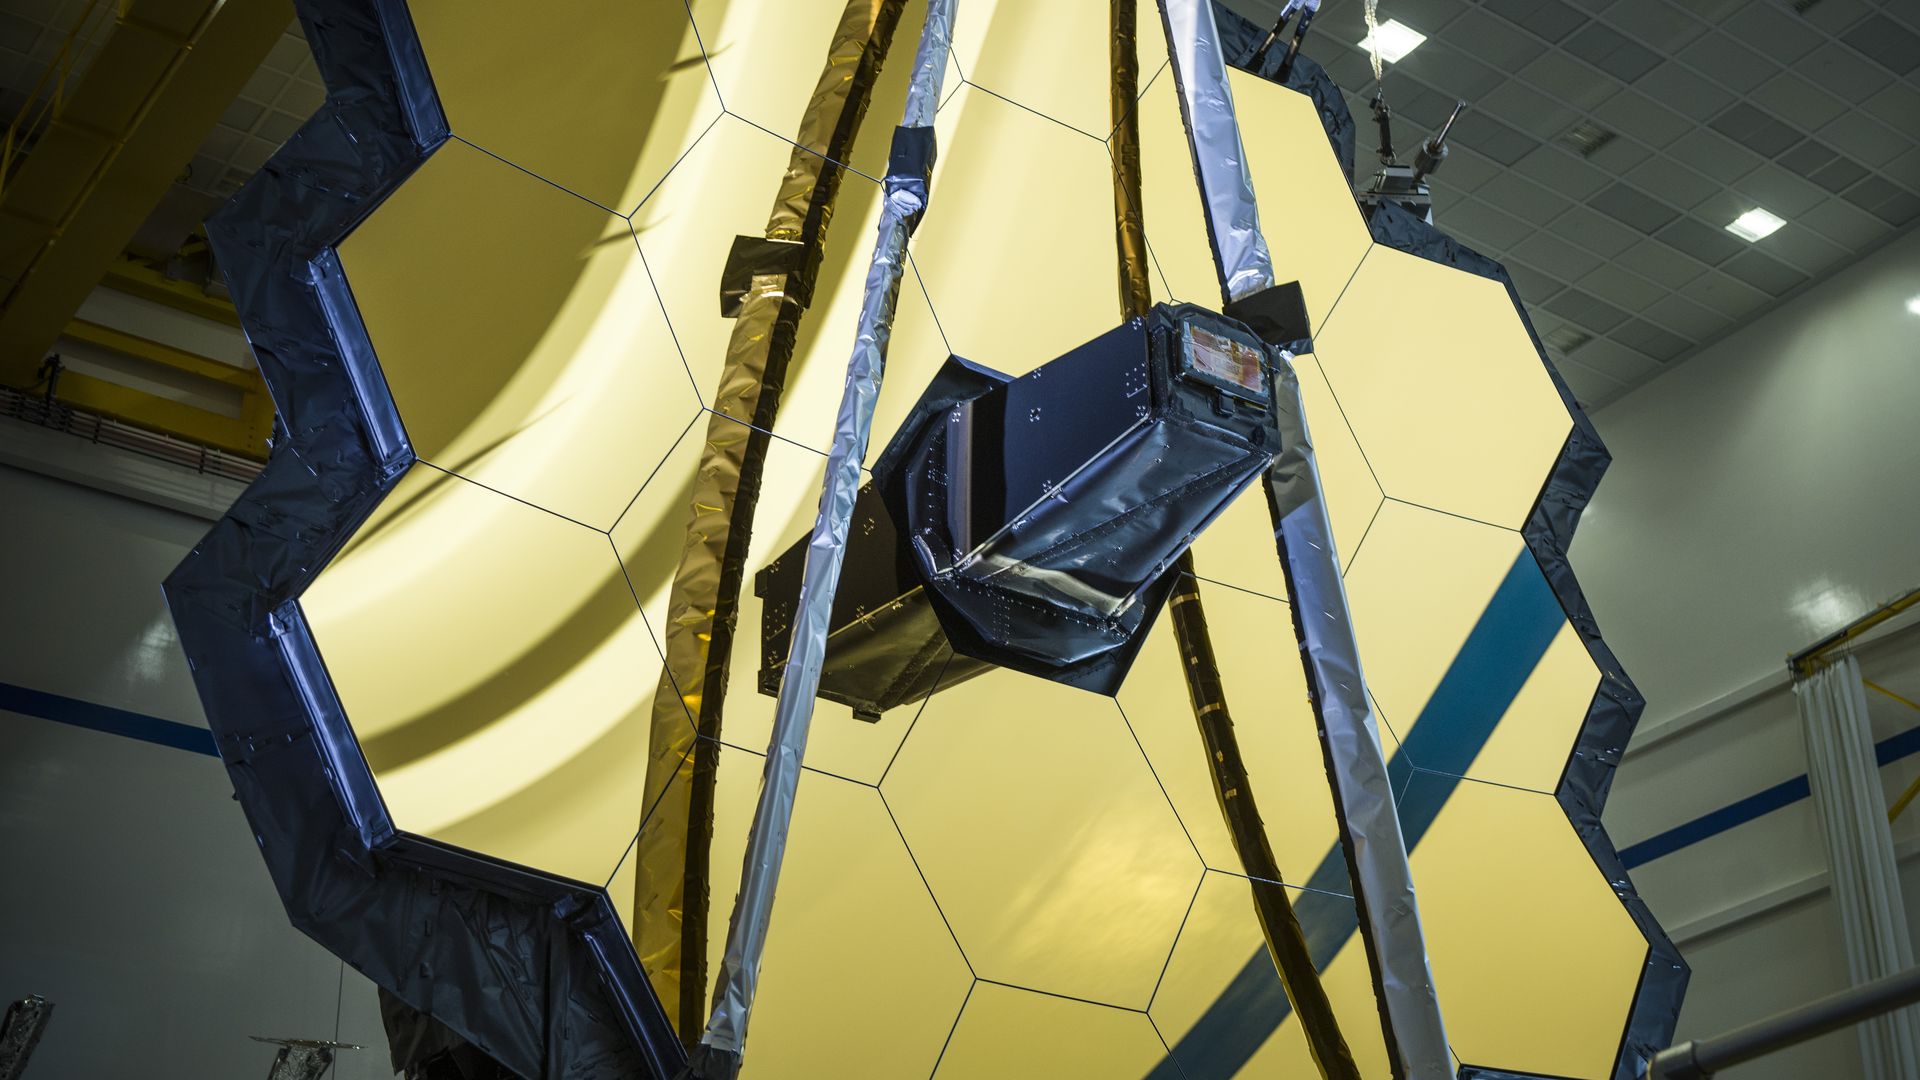 The mirrors of the James Webb Space Telescope deployed on Earth